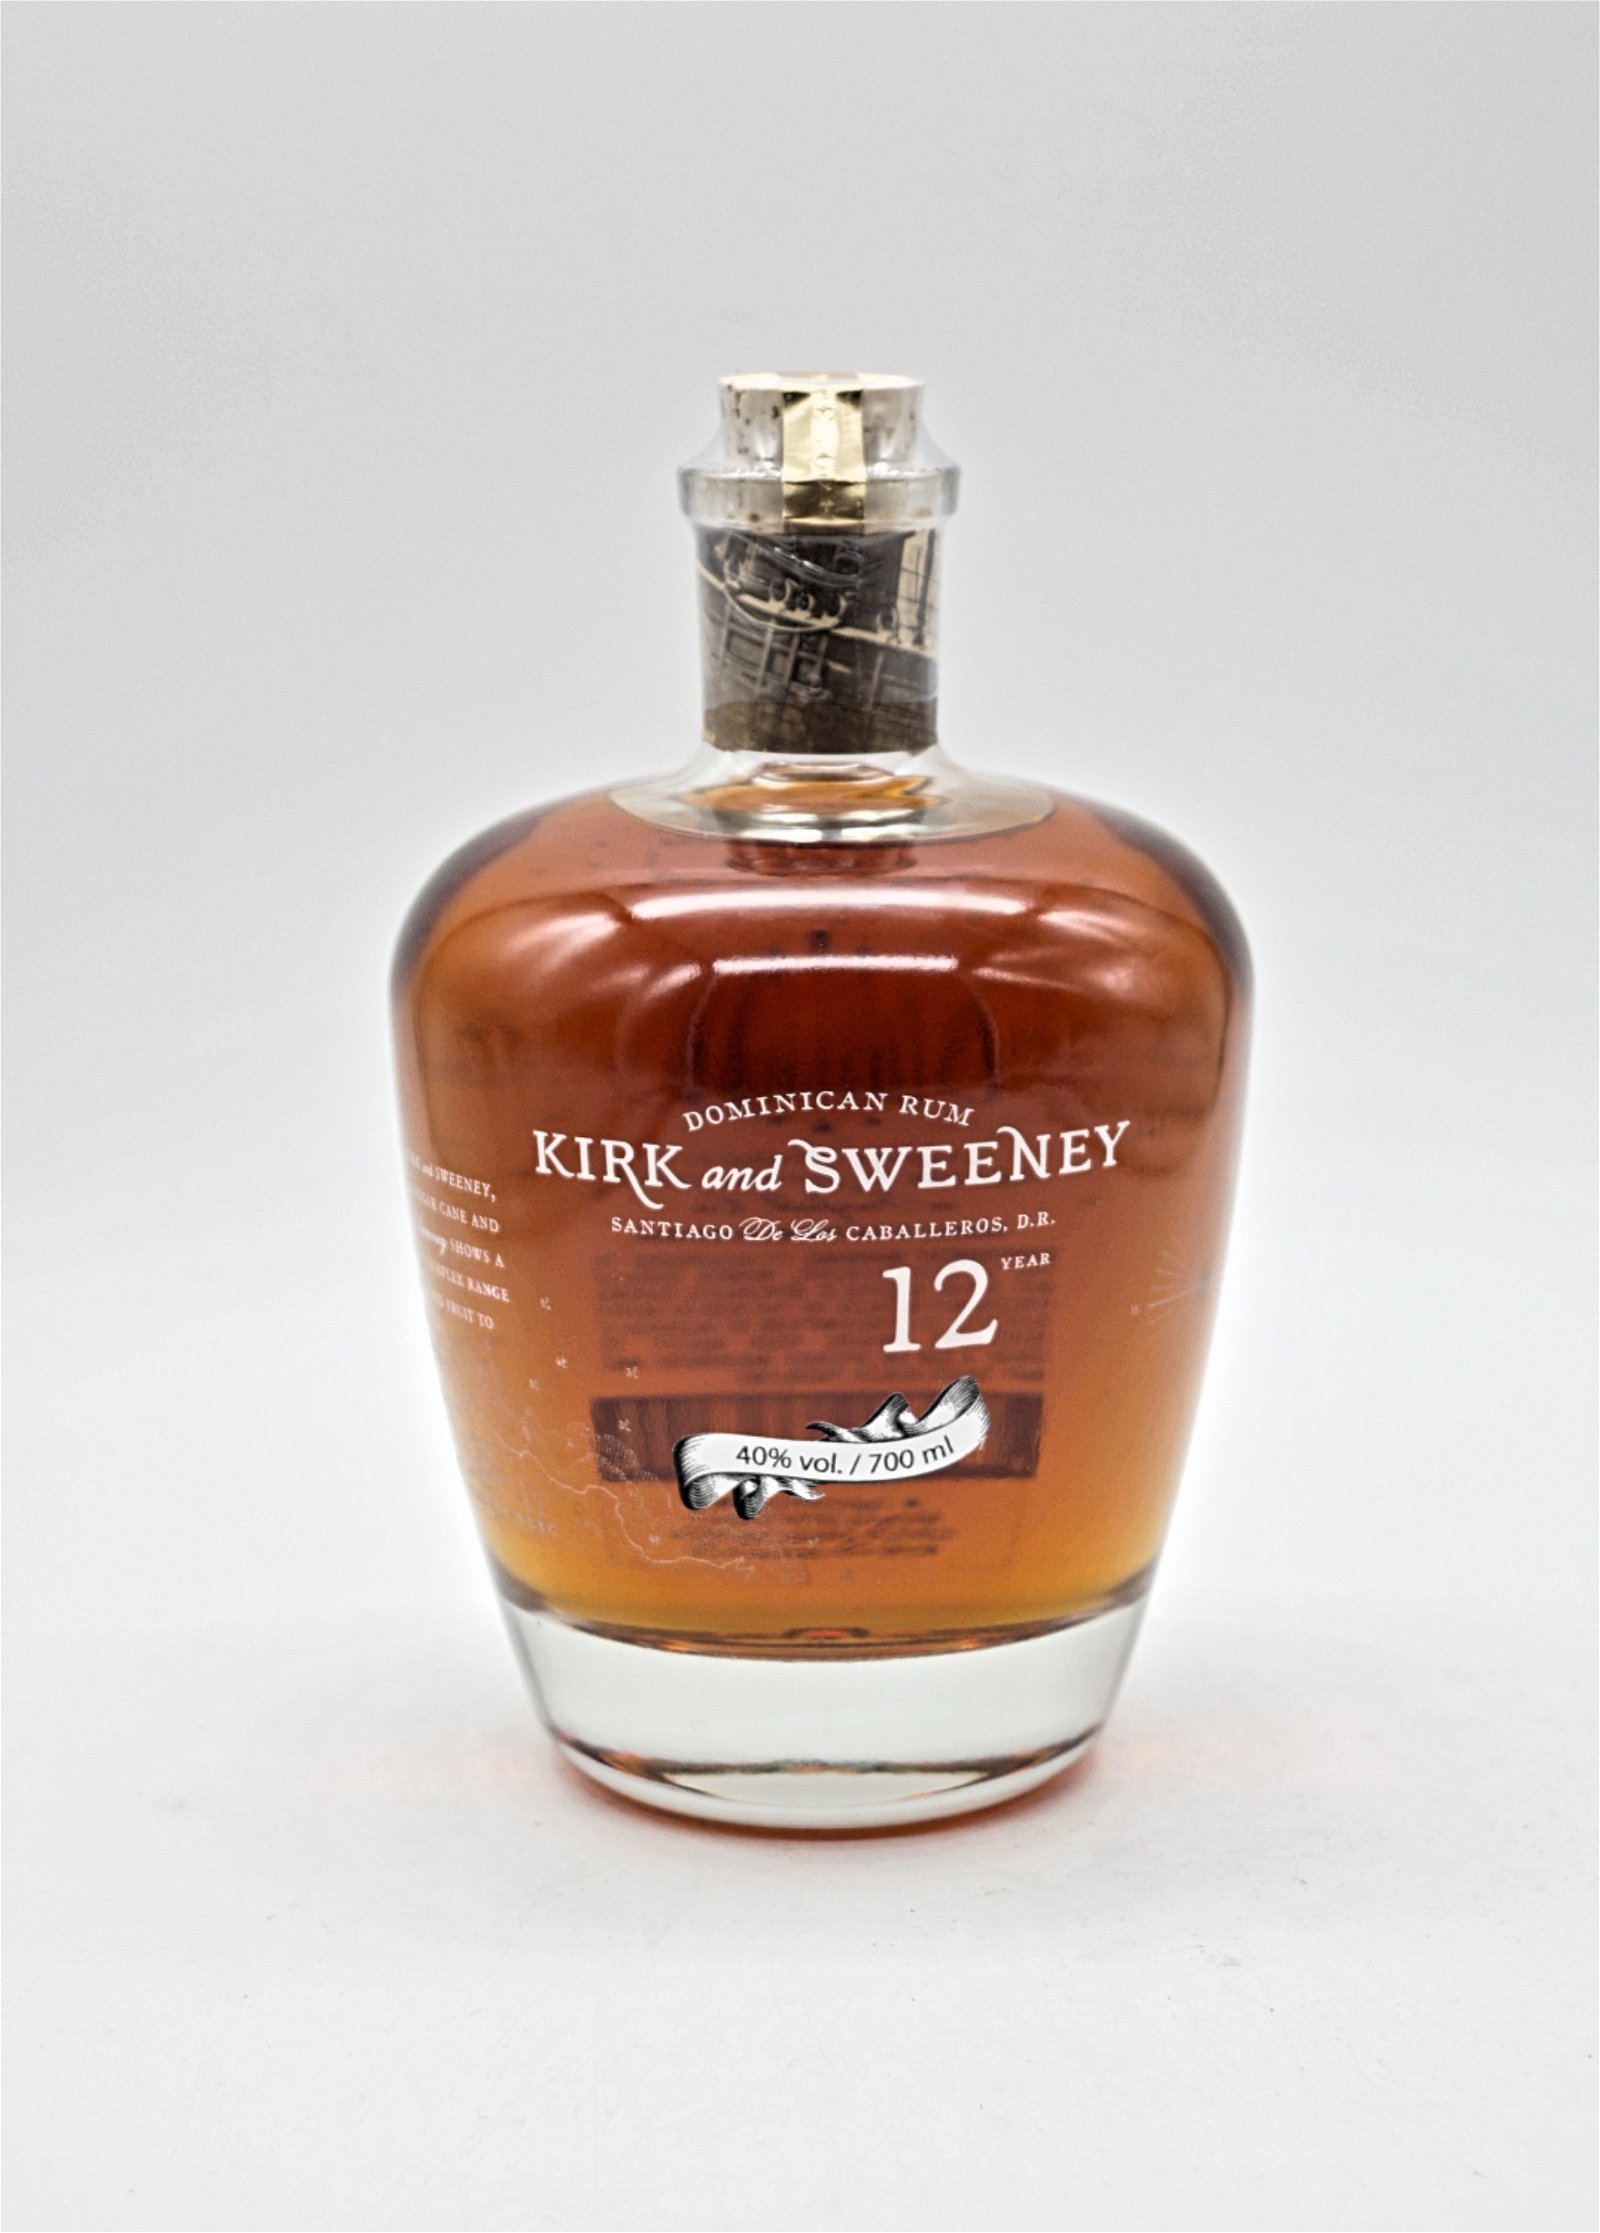 Kirk and Sweeney 12 Jahre Dominican Rum